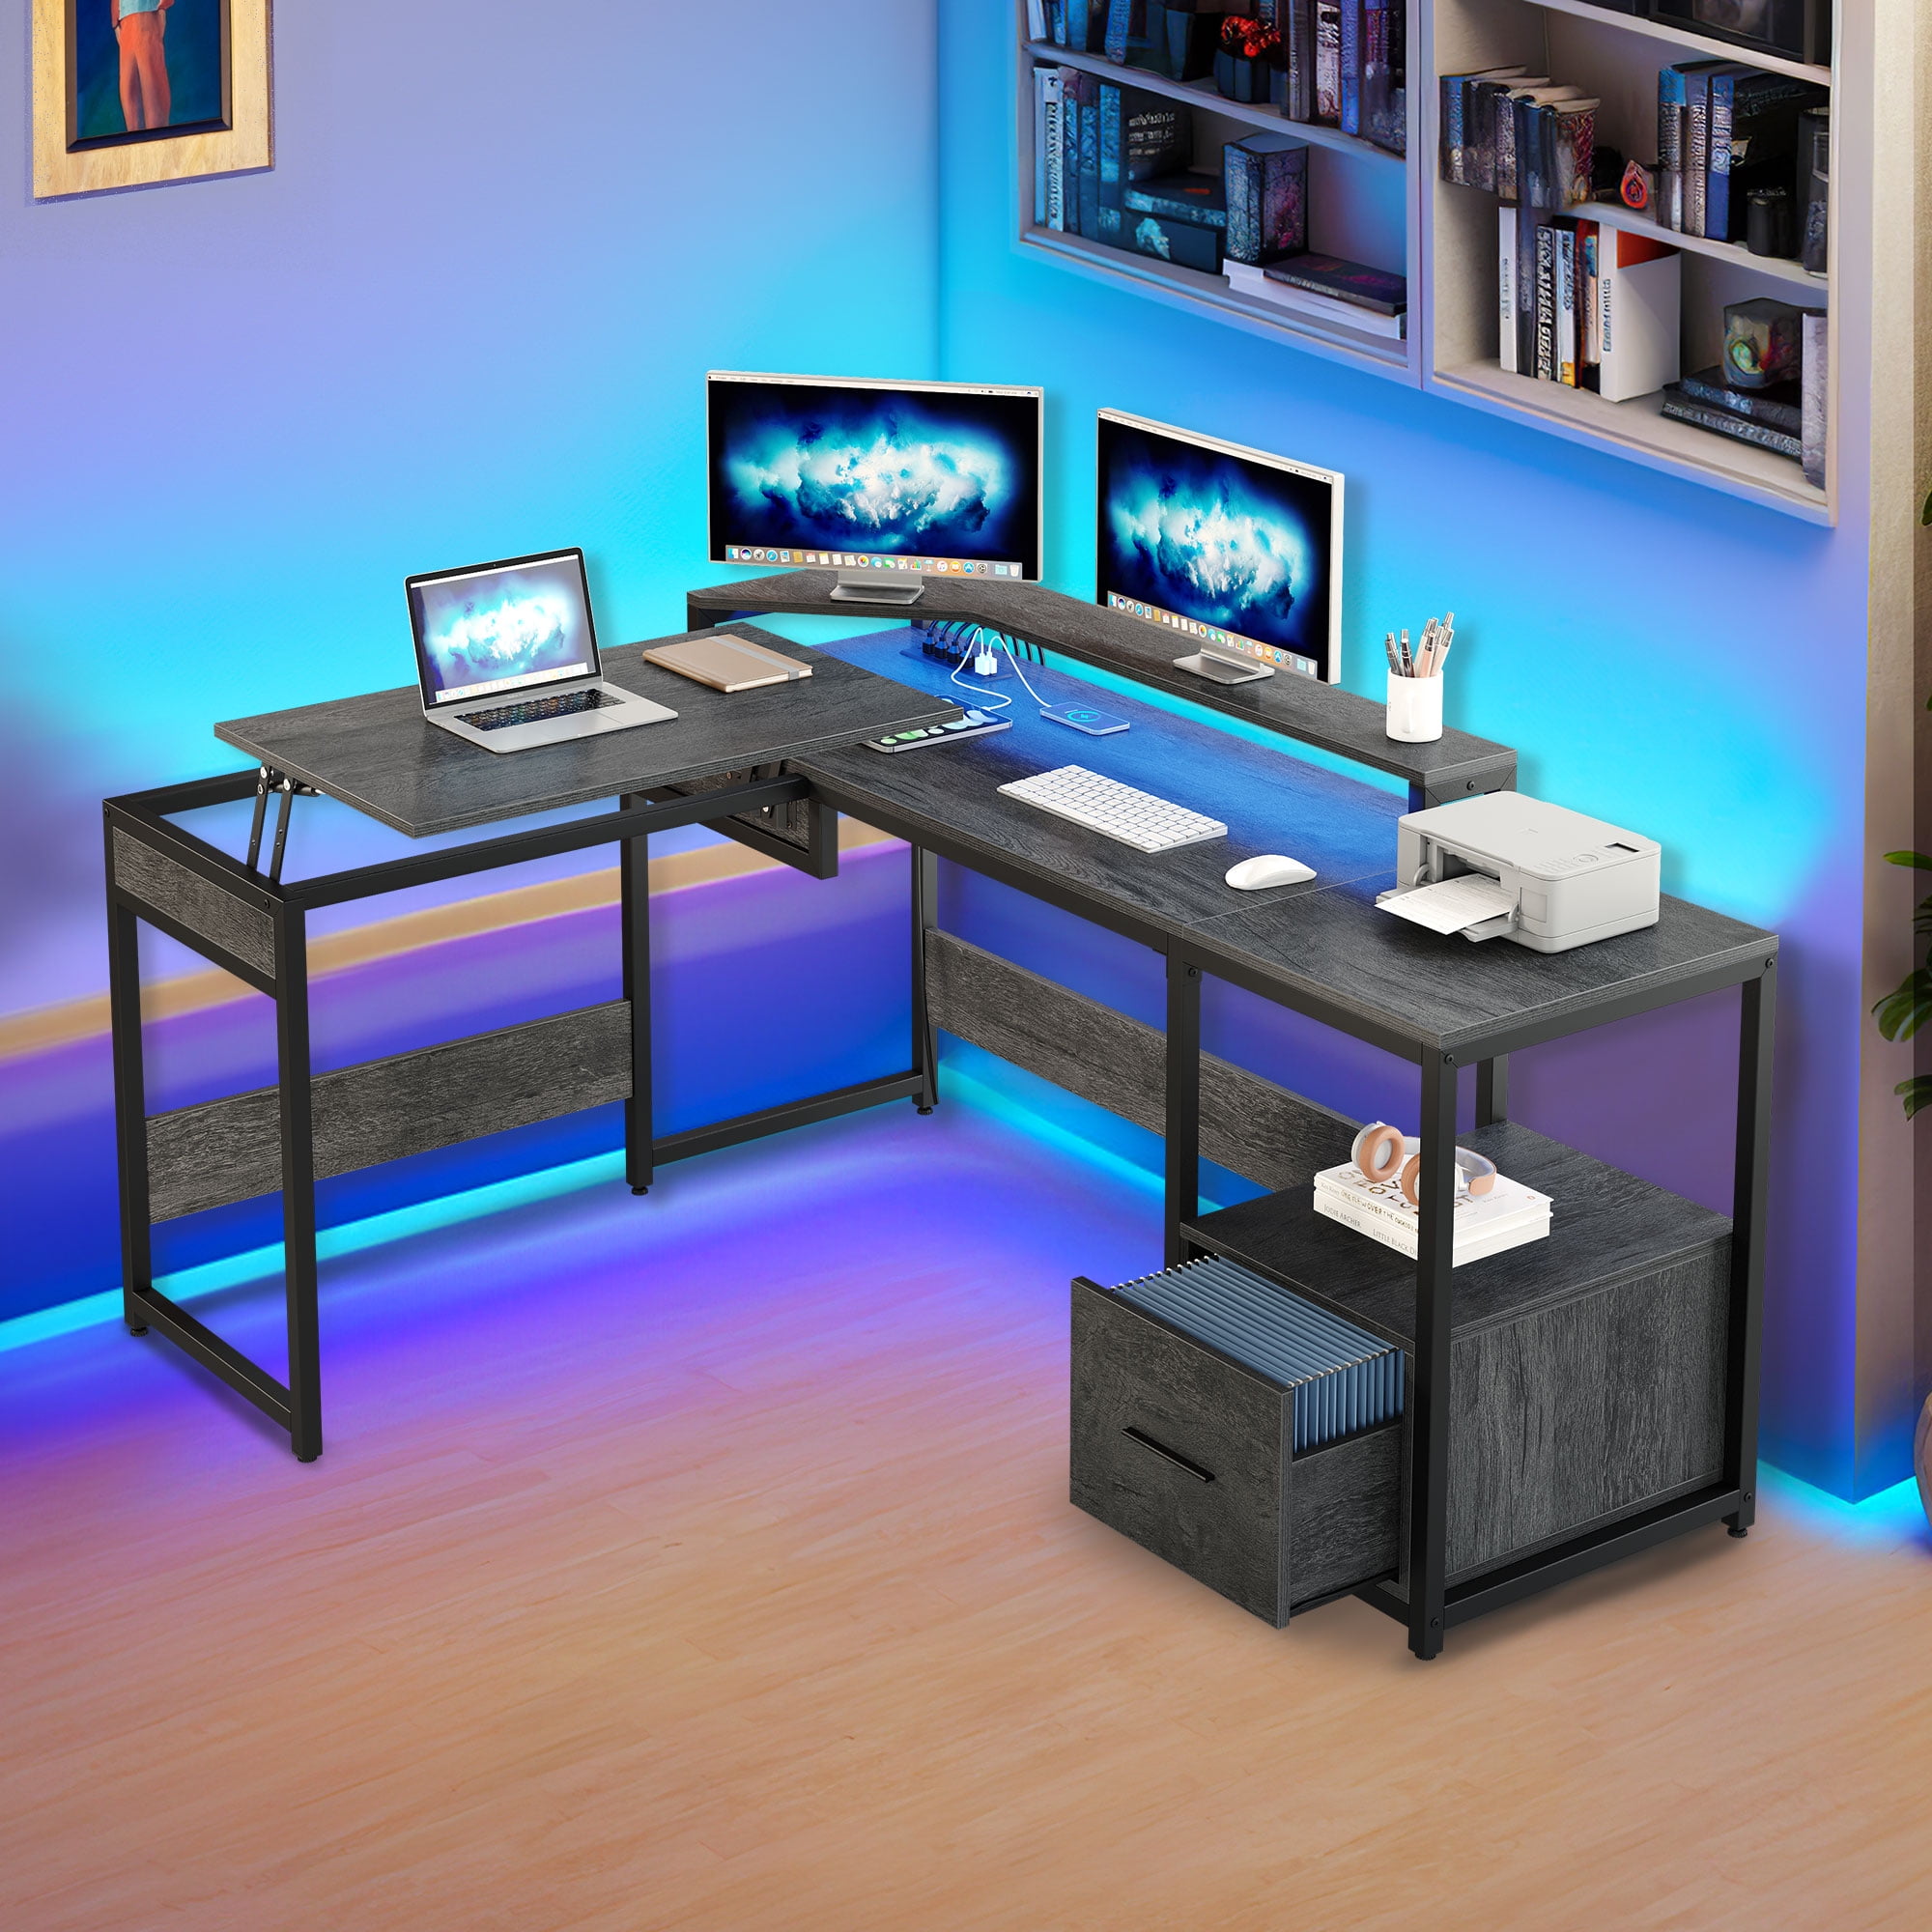 27 Cool Office Gadgets To Lift Your Productivity & Ambiance